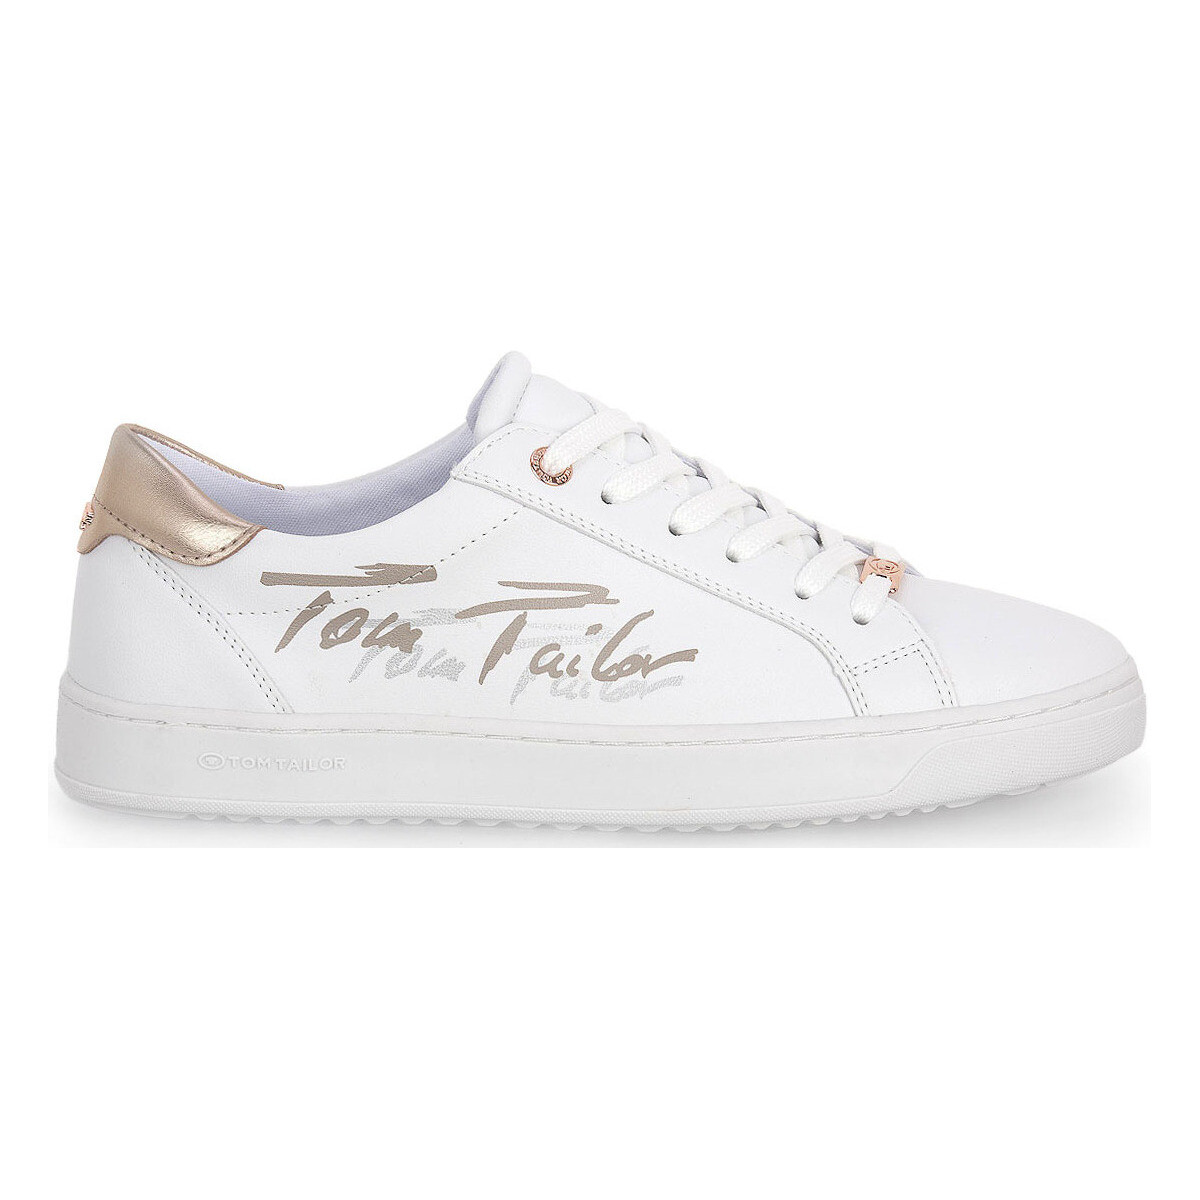 Sneakers Tom Tailor 009 WHITE ROSE GOLD